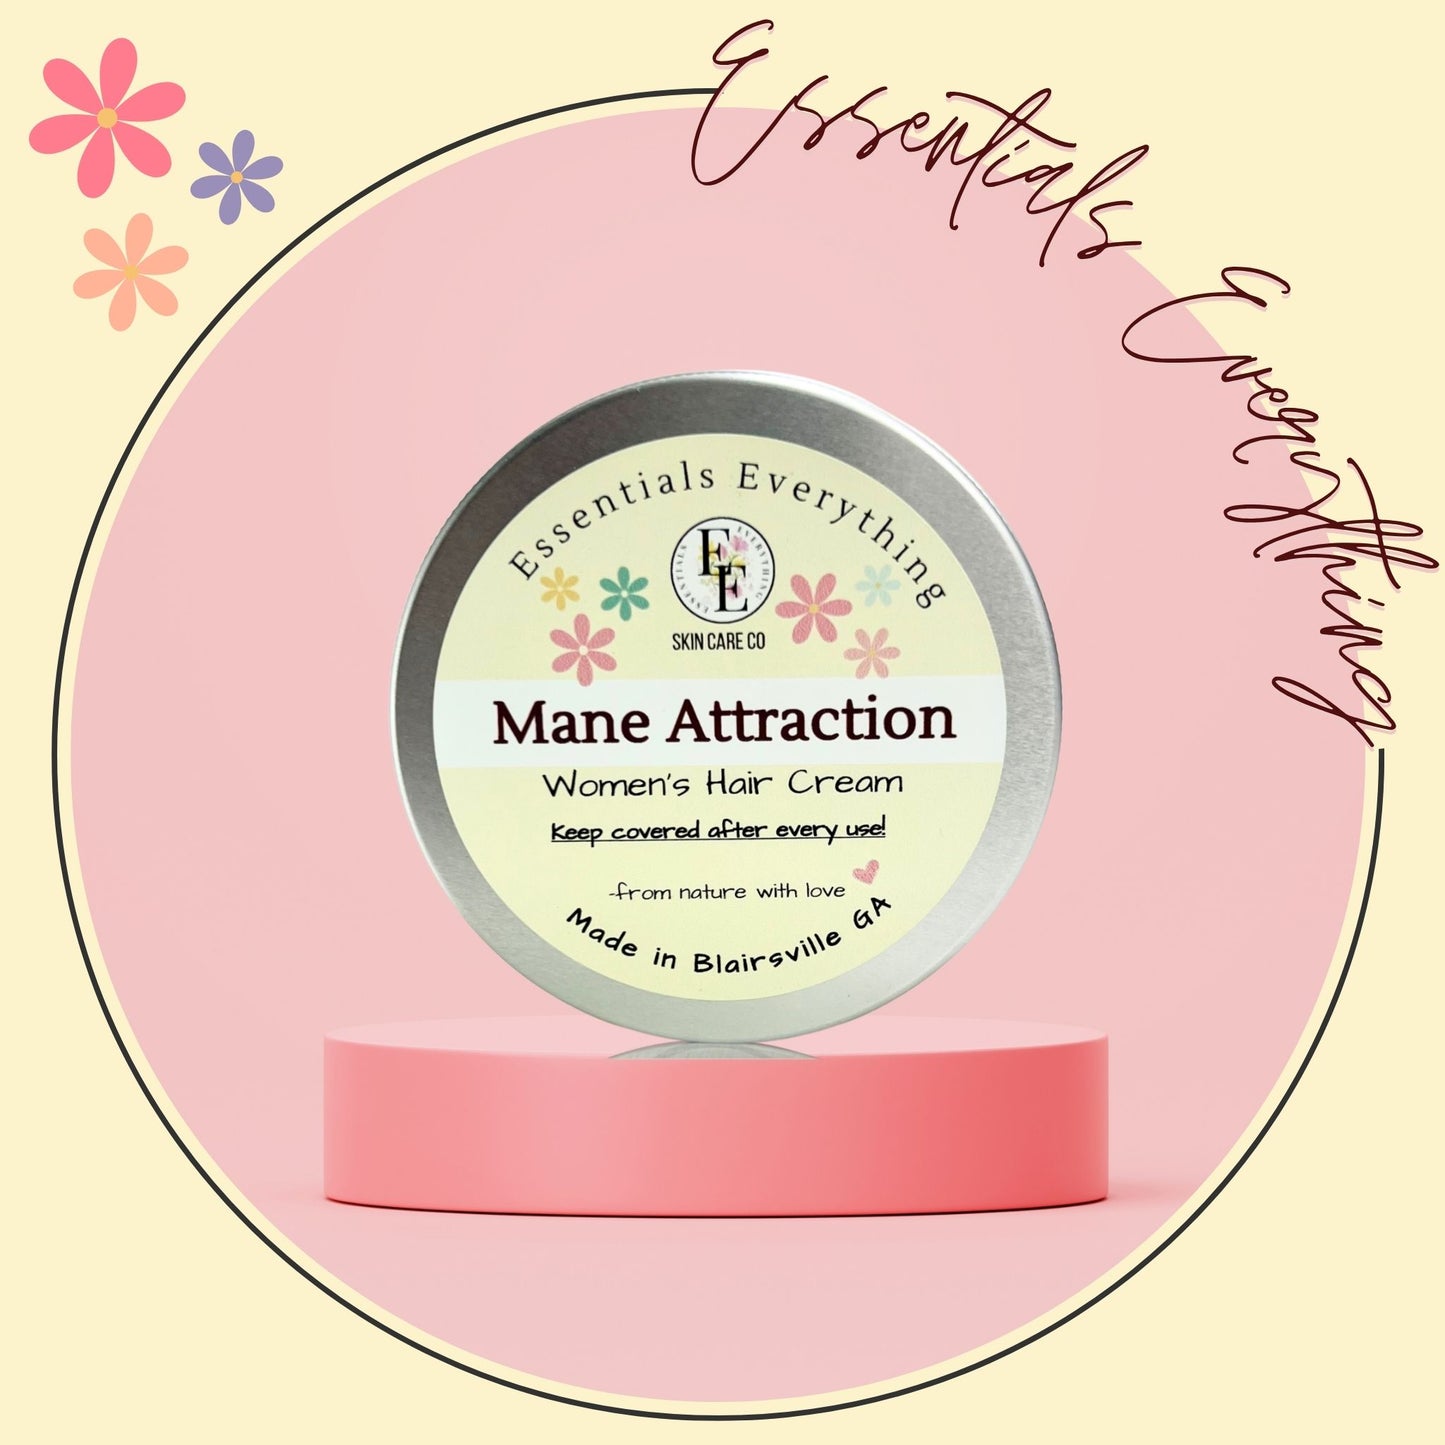 Mane Attraction - All Natural Hair Styling Conditioner for Her by Essentials Everything Skin Care Co 4 oz